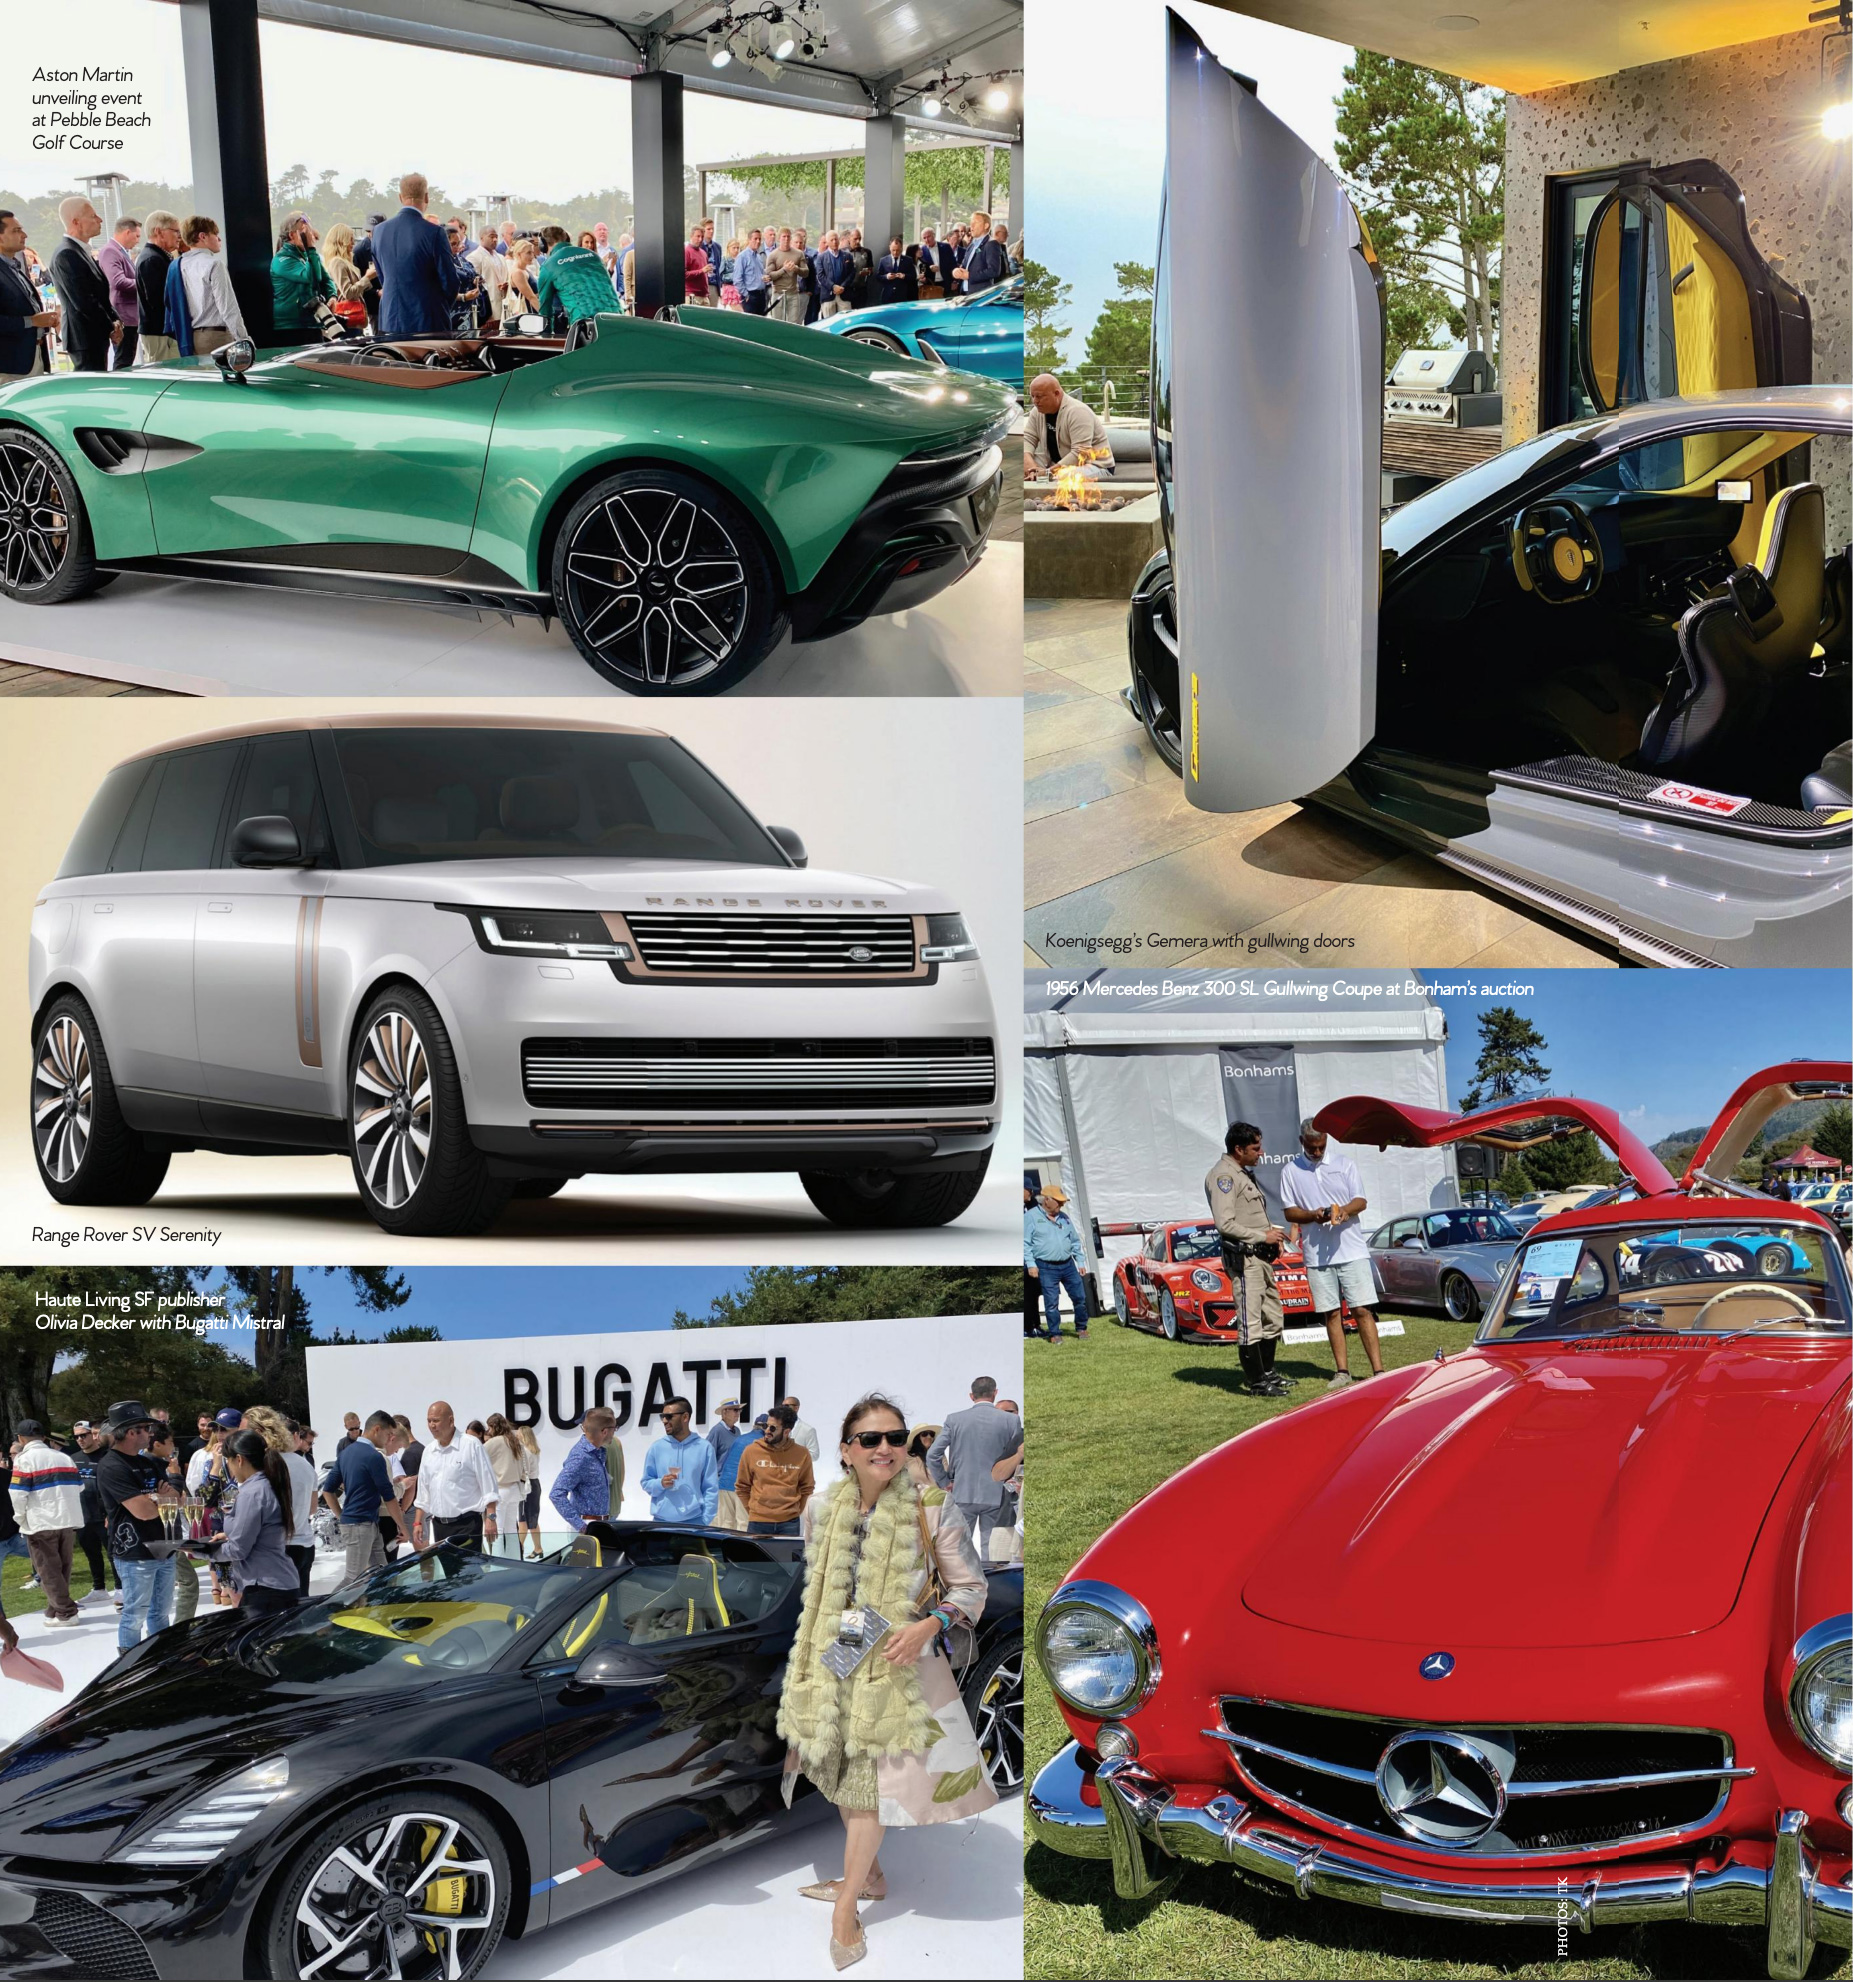 Aston Martin unveiling event at Pebble Beach Golf Course. Range Rover SV Serenity. Haute Living SF publisher Olivia Decker with Bugatti Mistral. Koenigsegg's Gemera with gullwing doors. 1956 Mercedes Benz 300 SL Gullwing Coupe at Bonham's auction